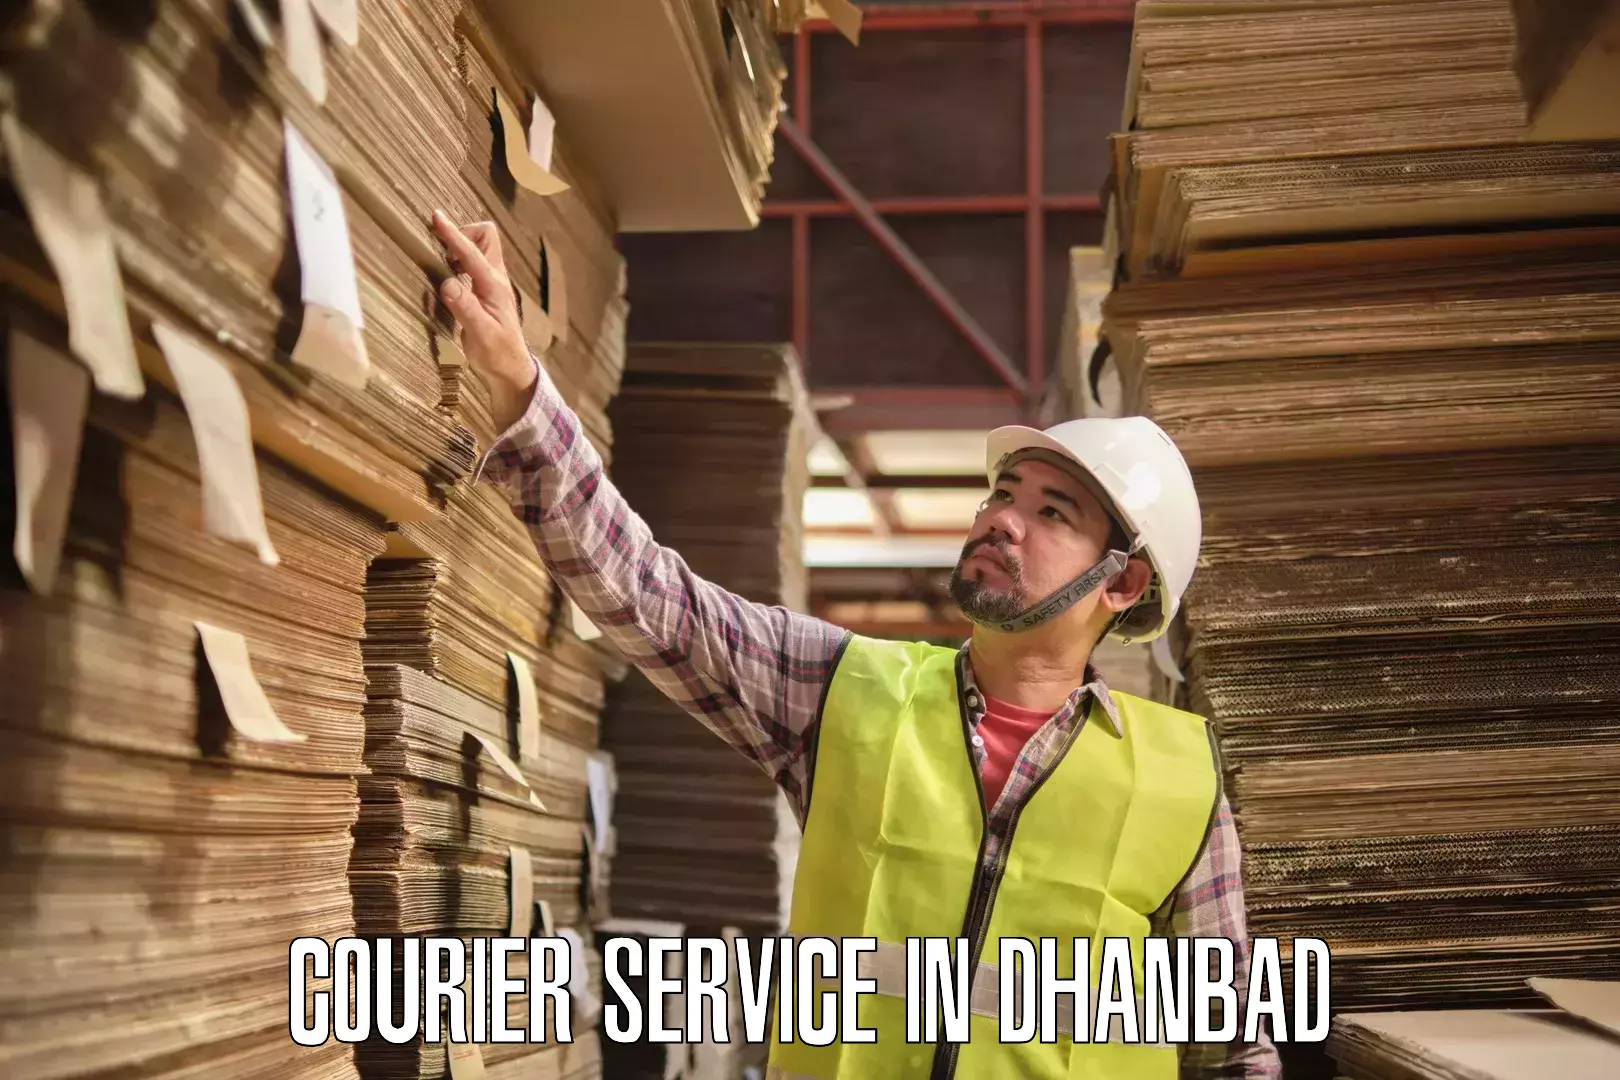 Courier service partnerships in Dhanbad